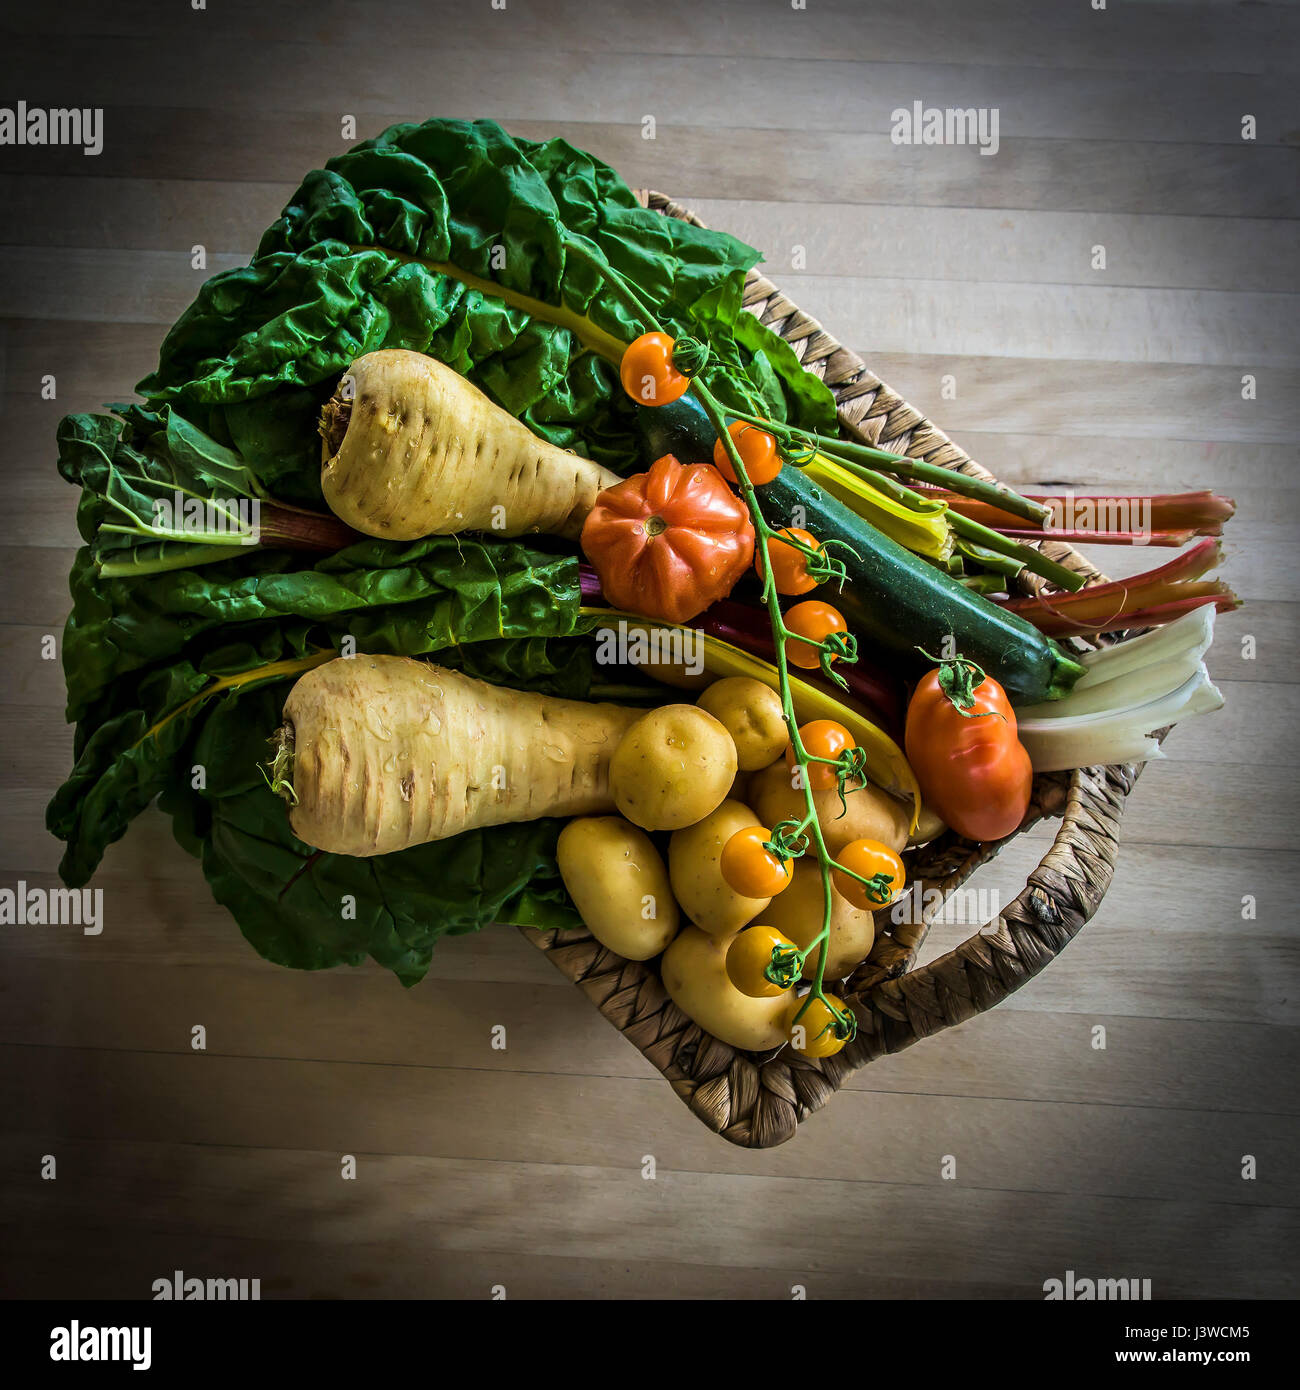 A basket of various fresh vegetables Food Source of nutrition Ingredients Tomatoes Parsnips Potatoes Rainbow Chard Ingredients for cooking Stock Photo